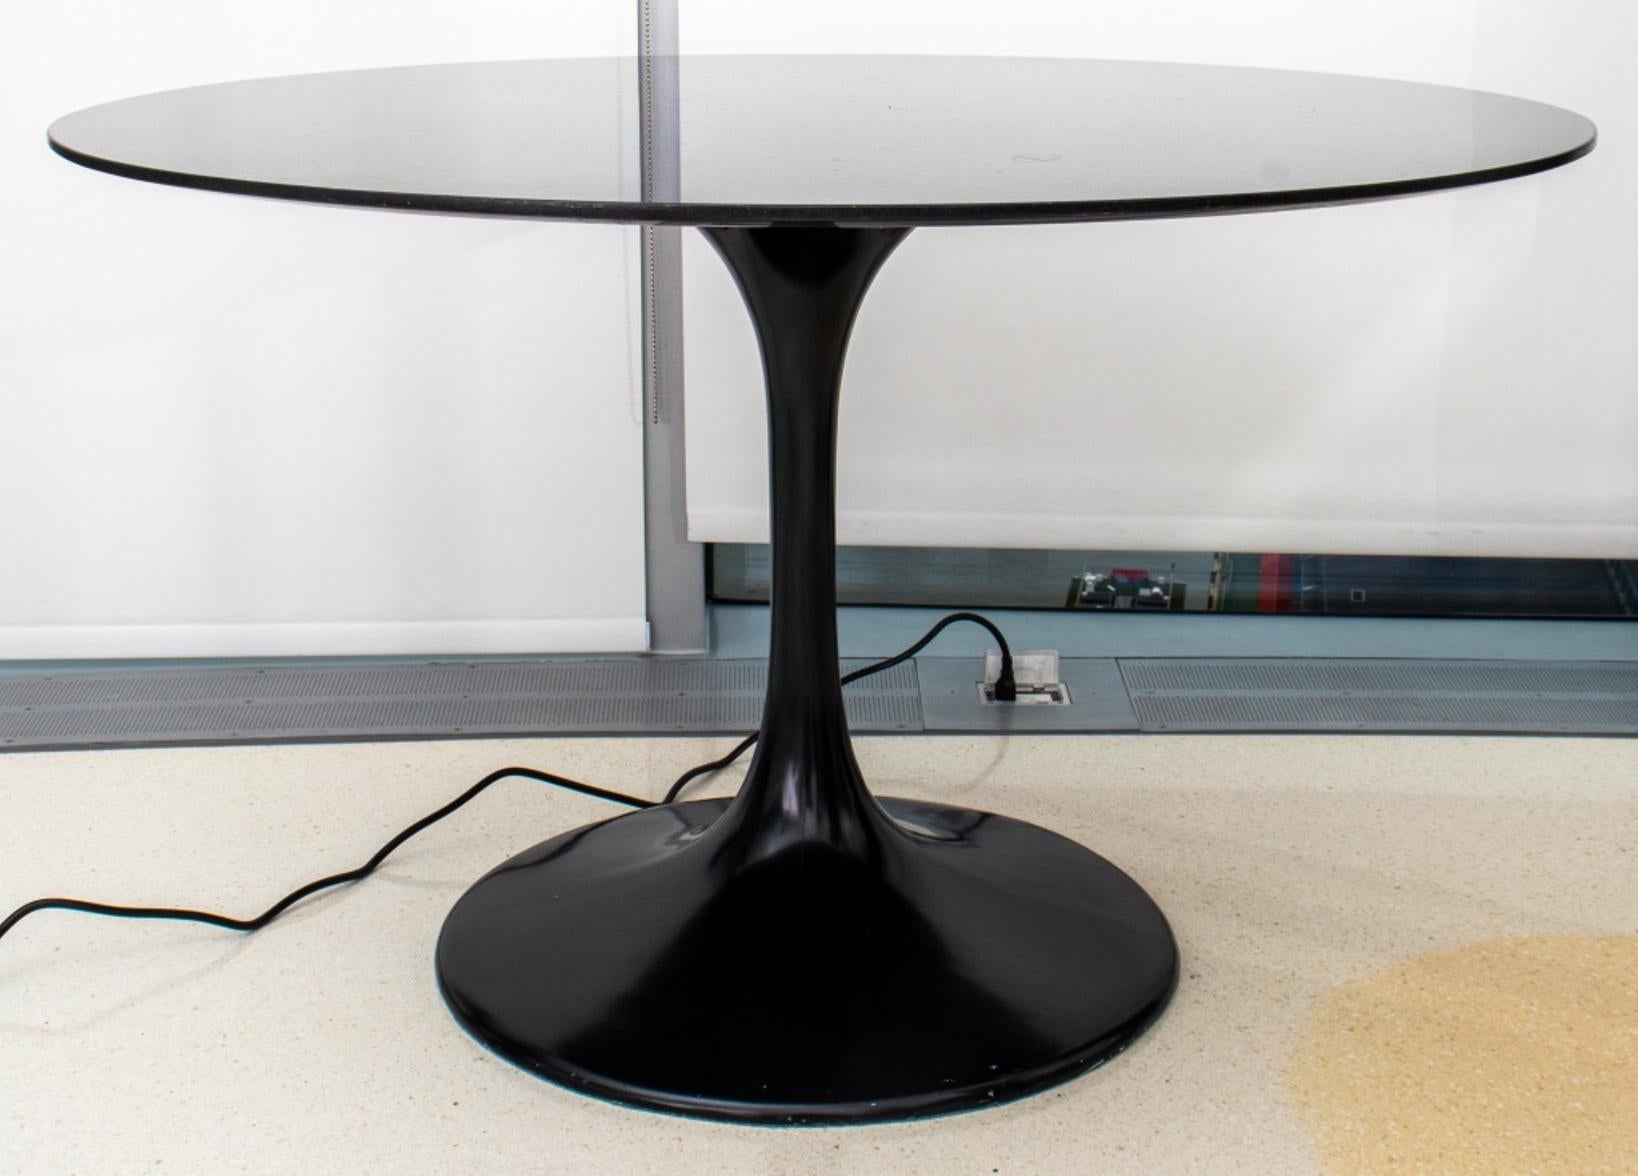 Knoll style circular tulip table in the manner of Eero Saarinen (Finnish, 1910-1961) with brnize granite tope on black columnar base.

Dimensions: 29